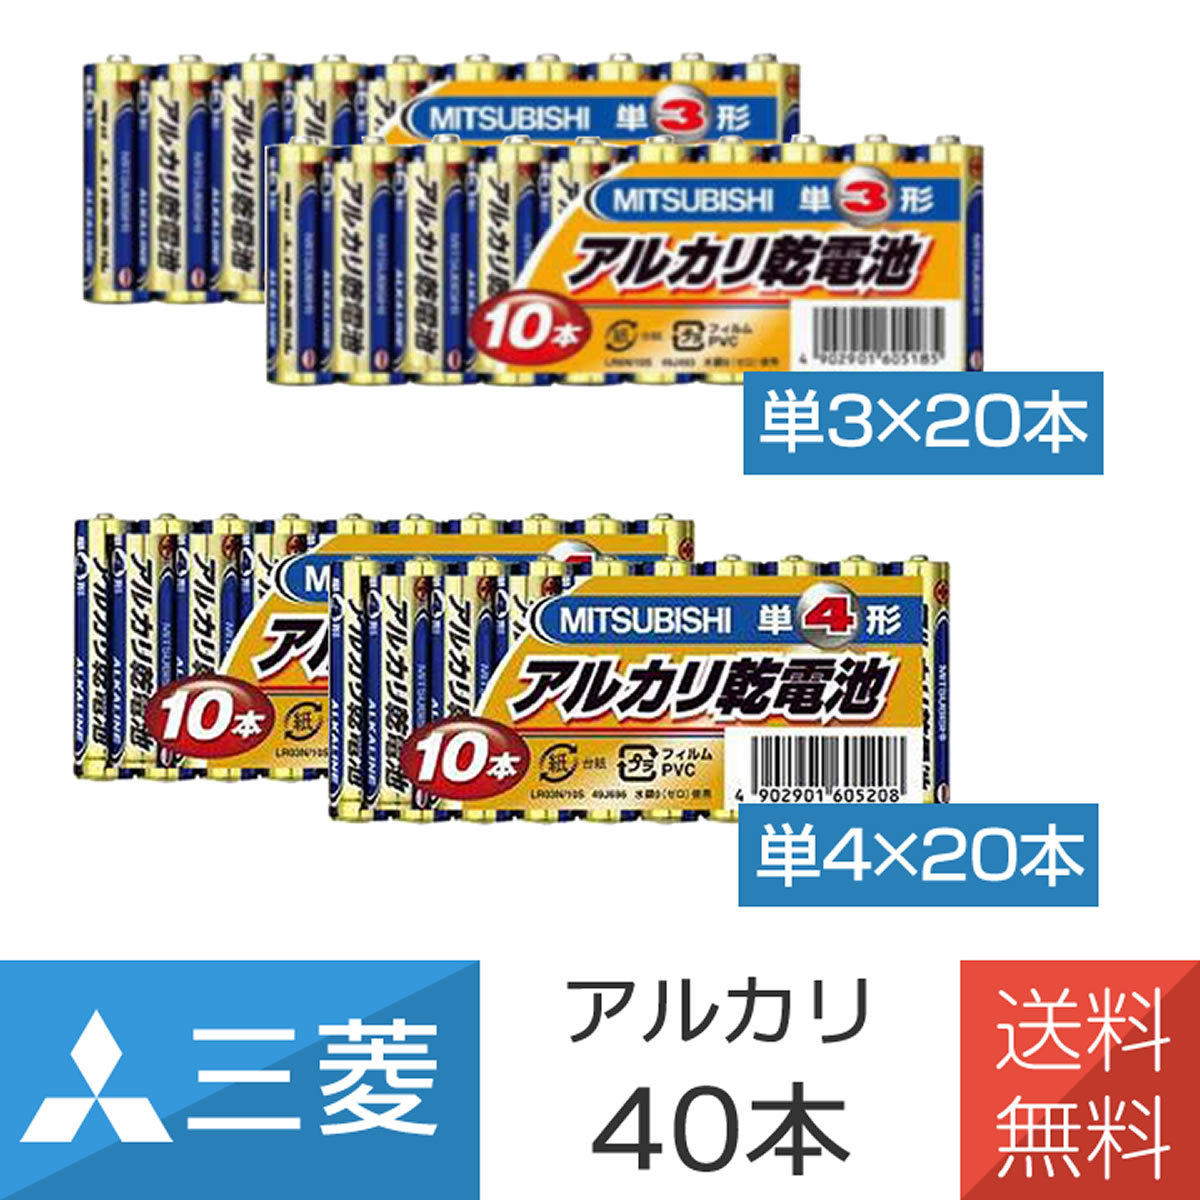  battery battery alkaline battery single 3 shape single 4 shape single 3x20ps.@ single 4x20ps.@ total 40 pcs set Mitsubishi Electric for emergency strategic reserve earthquake disaster prevention evacuation 